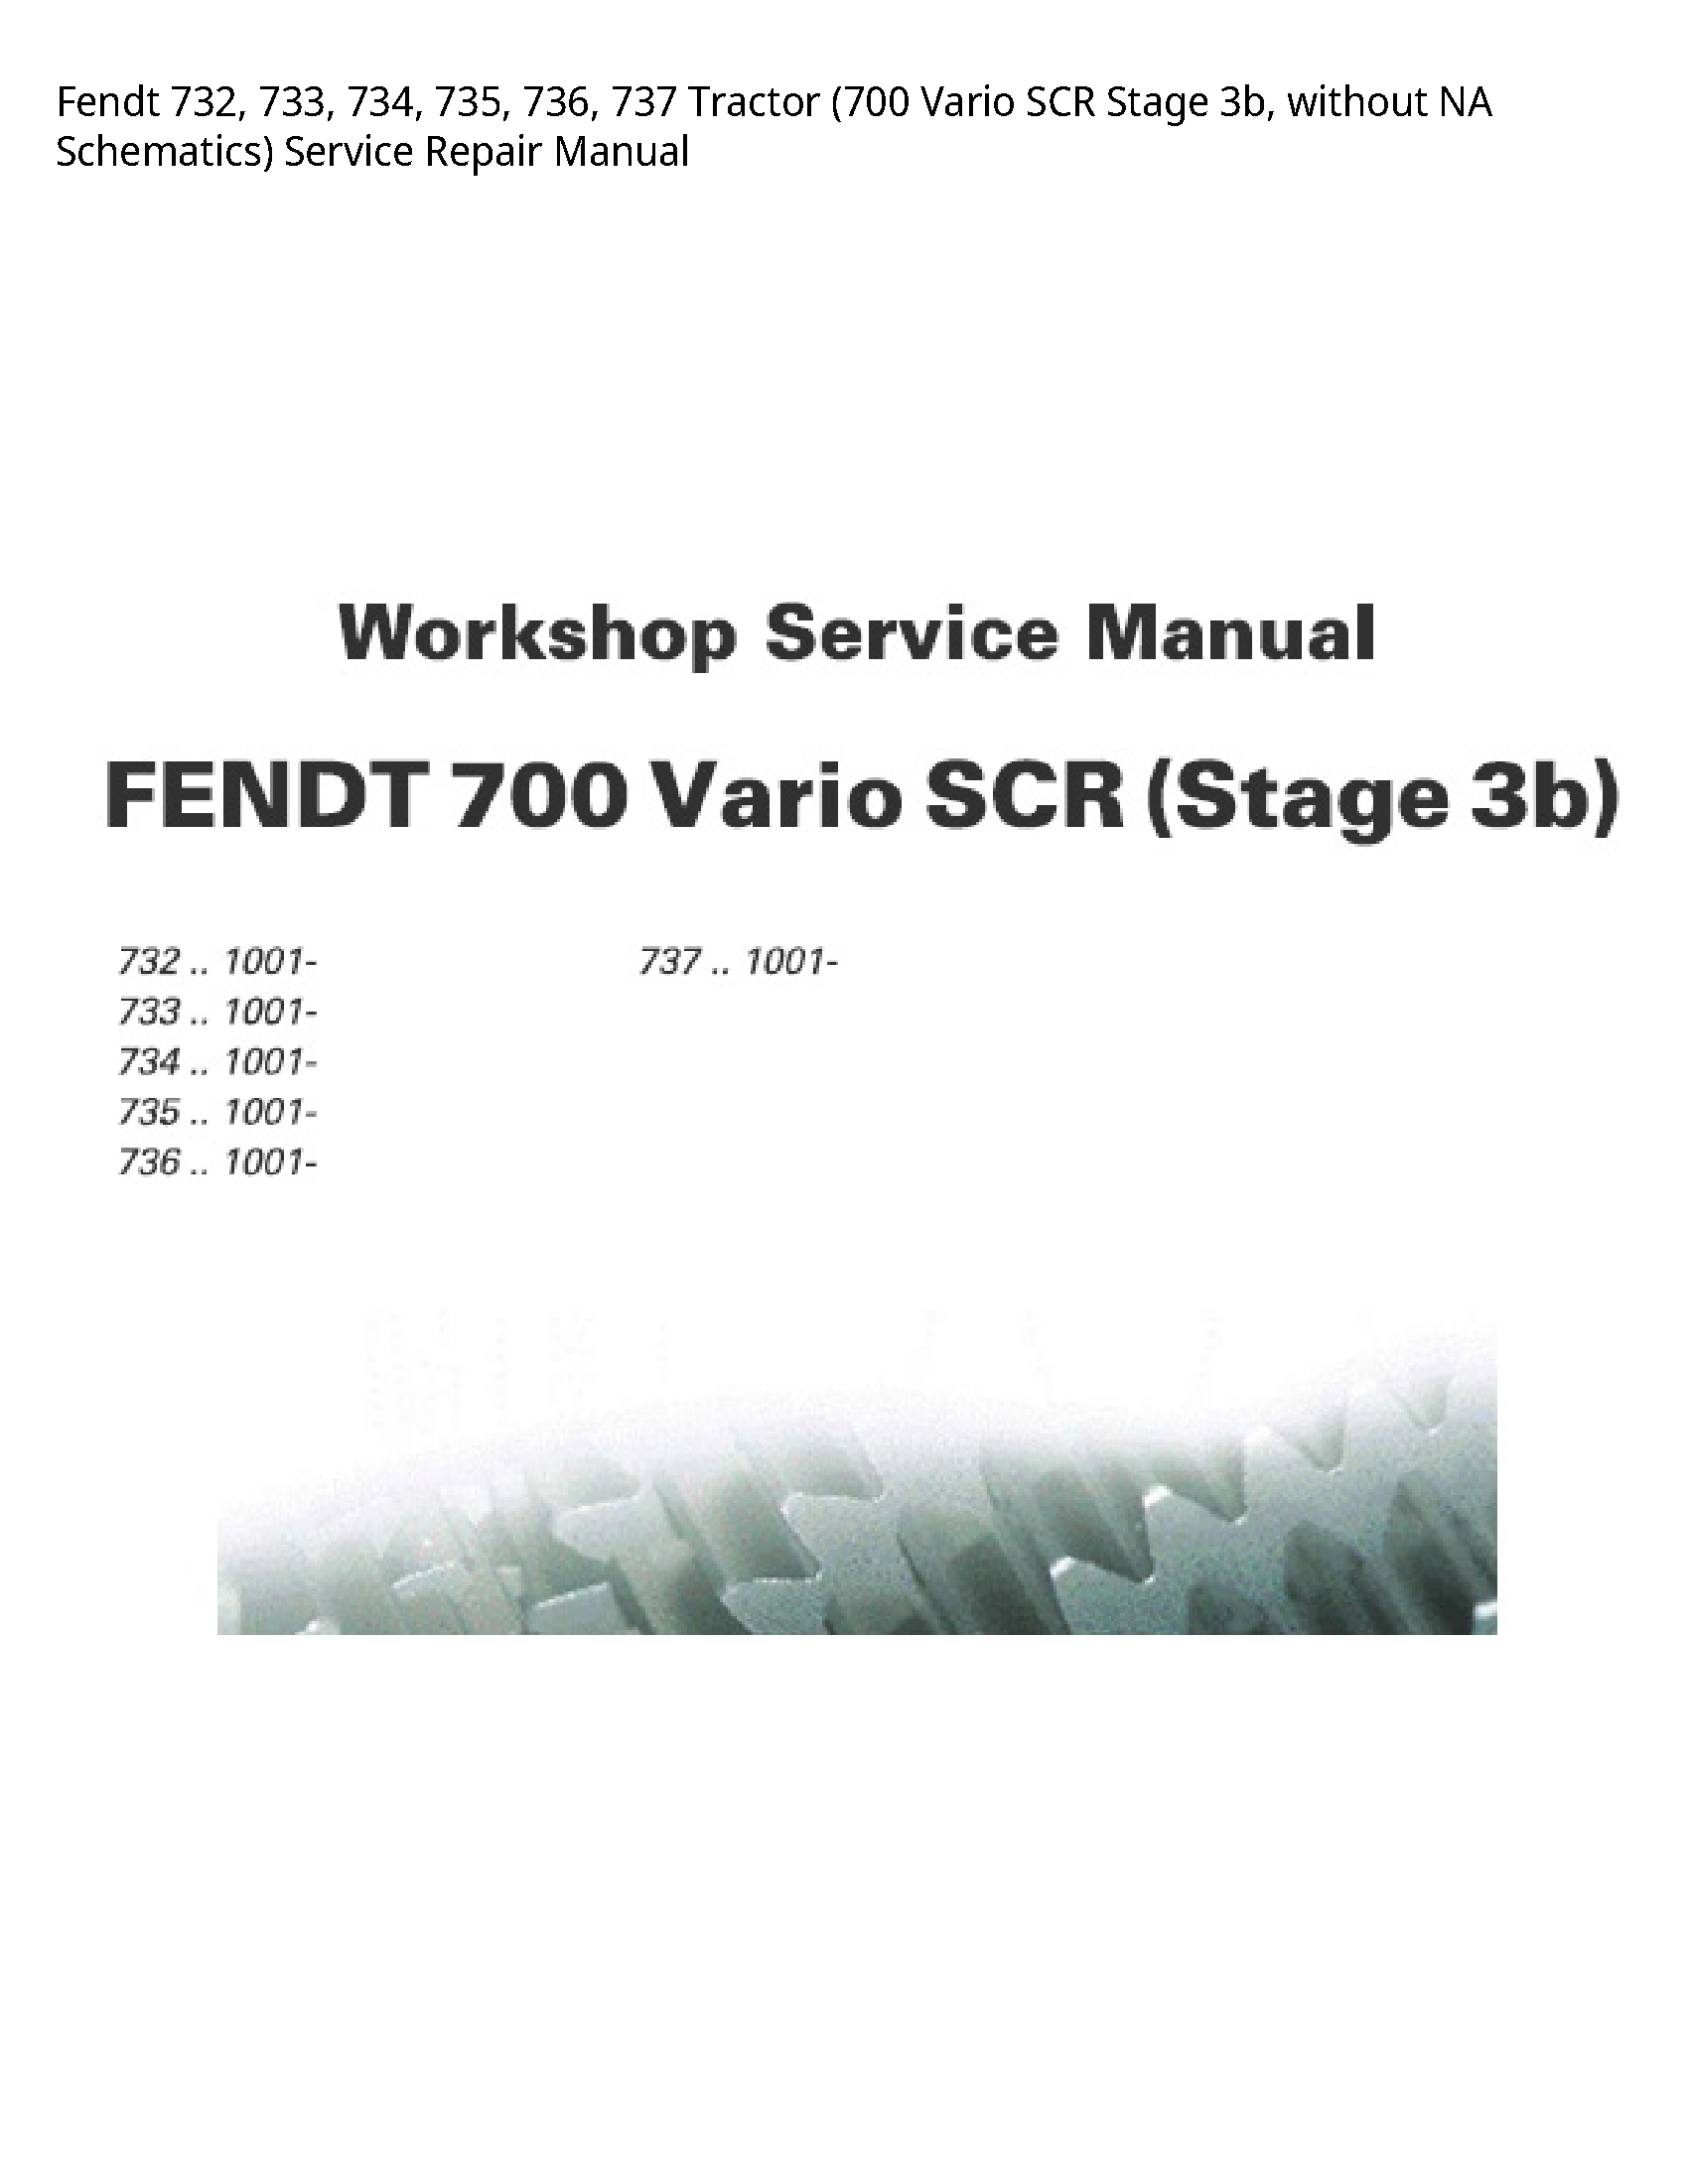 Fendt 732 Tractor Vario SCR Stage without NA Schematics) manual